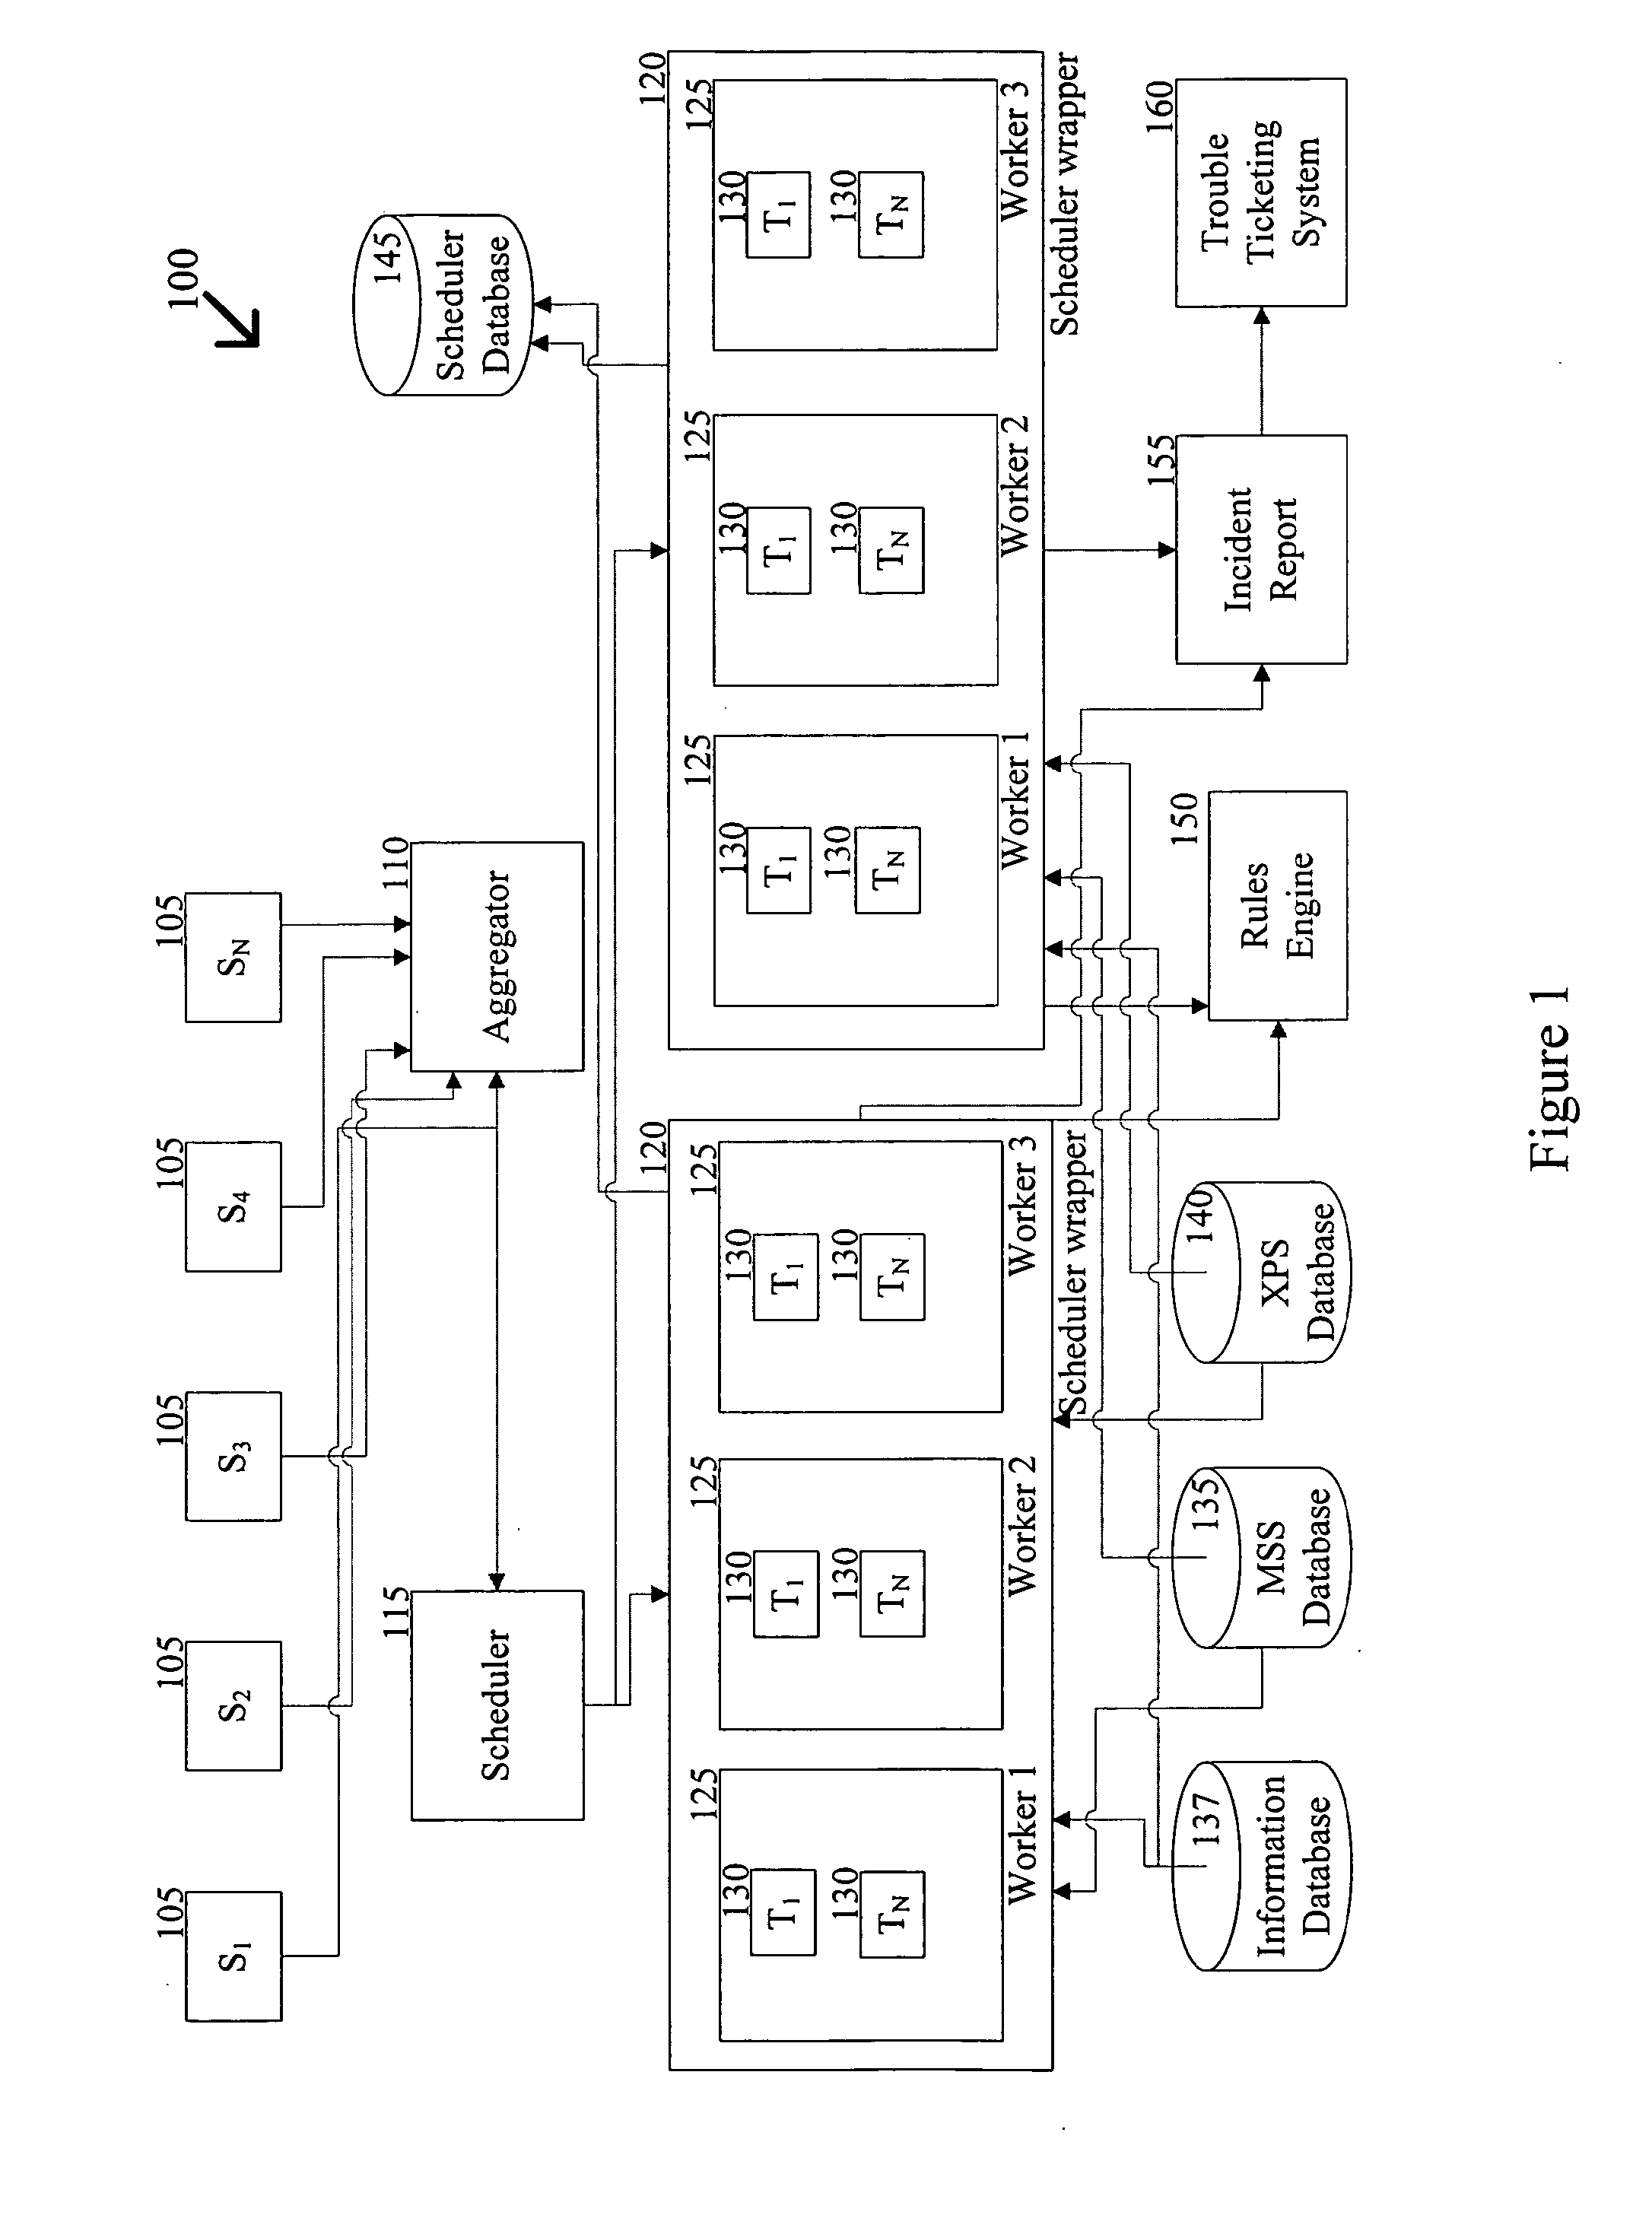 Method and System for Analysis of Security Events in a Managed Computer Network